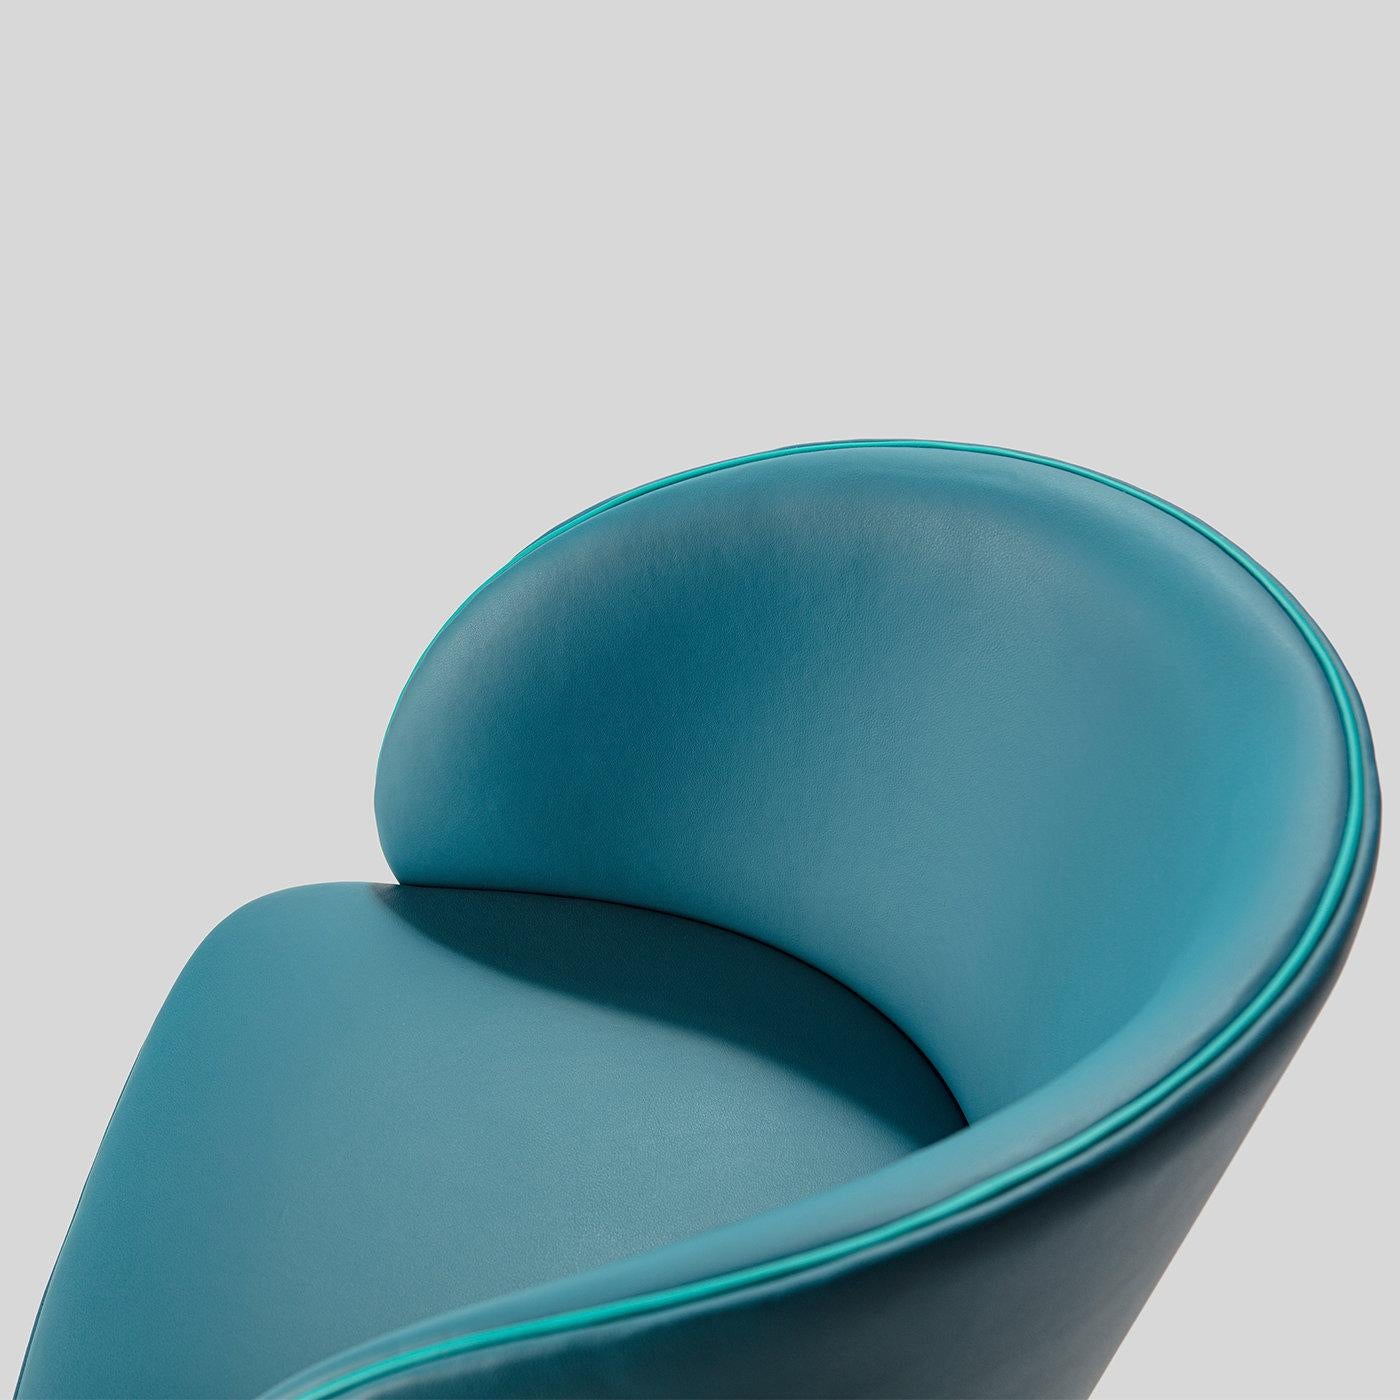 Part of the Kyoto Collection of chairs characterized by rounded and well-proportioned shapes. The beechwood frame boasts a nicely curved backrest and generous seat raised on long, tapered black-finished legs with low footrests. Wrapped in light blue